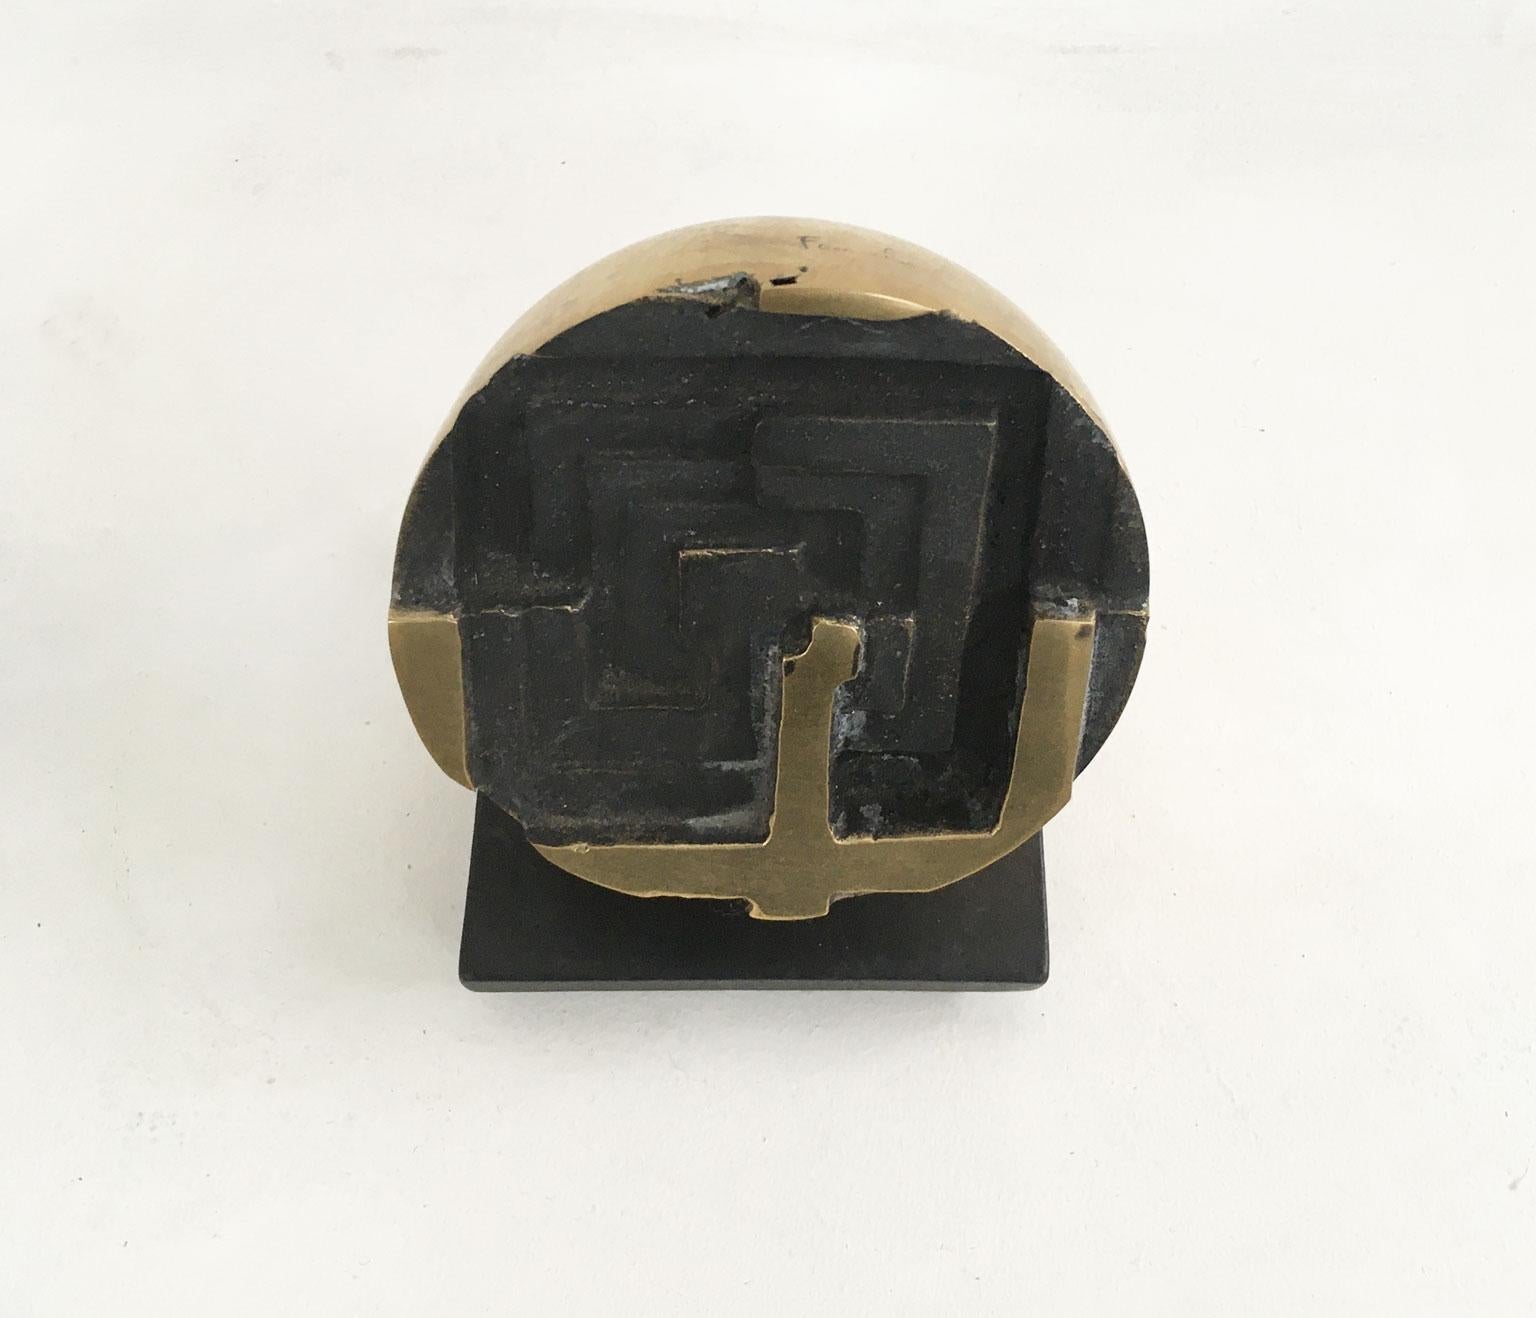 Post-Modern 1978 Italy Bronze Abstract Sculpture by Fanna Roncoroni Labirinto Labyrinth For Sale